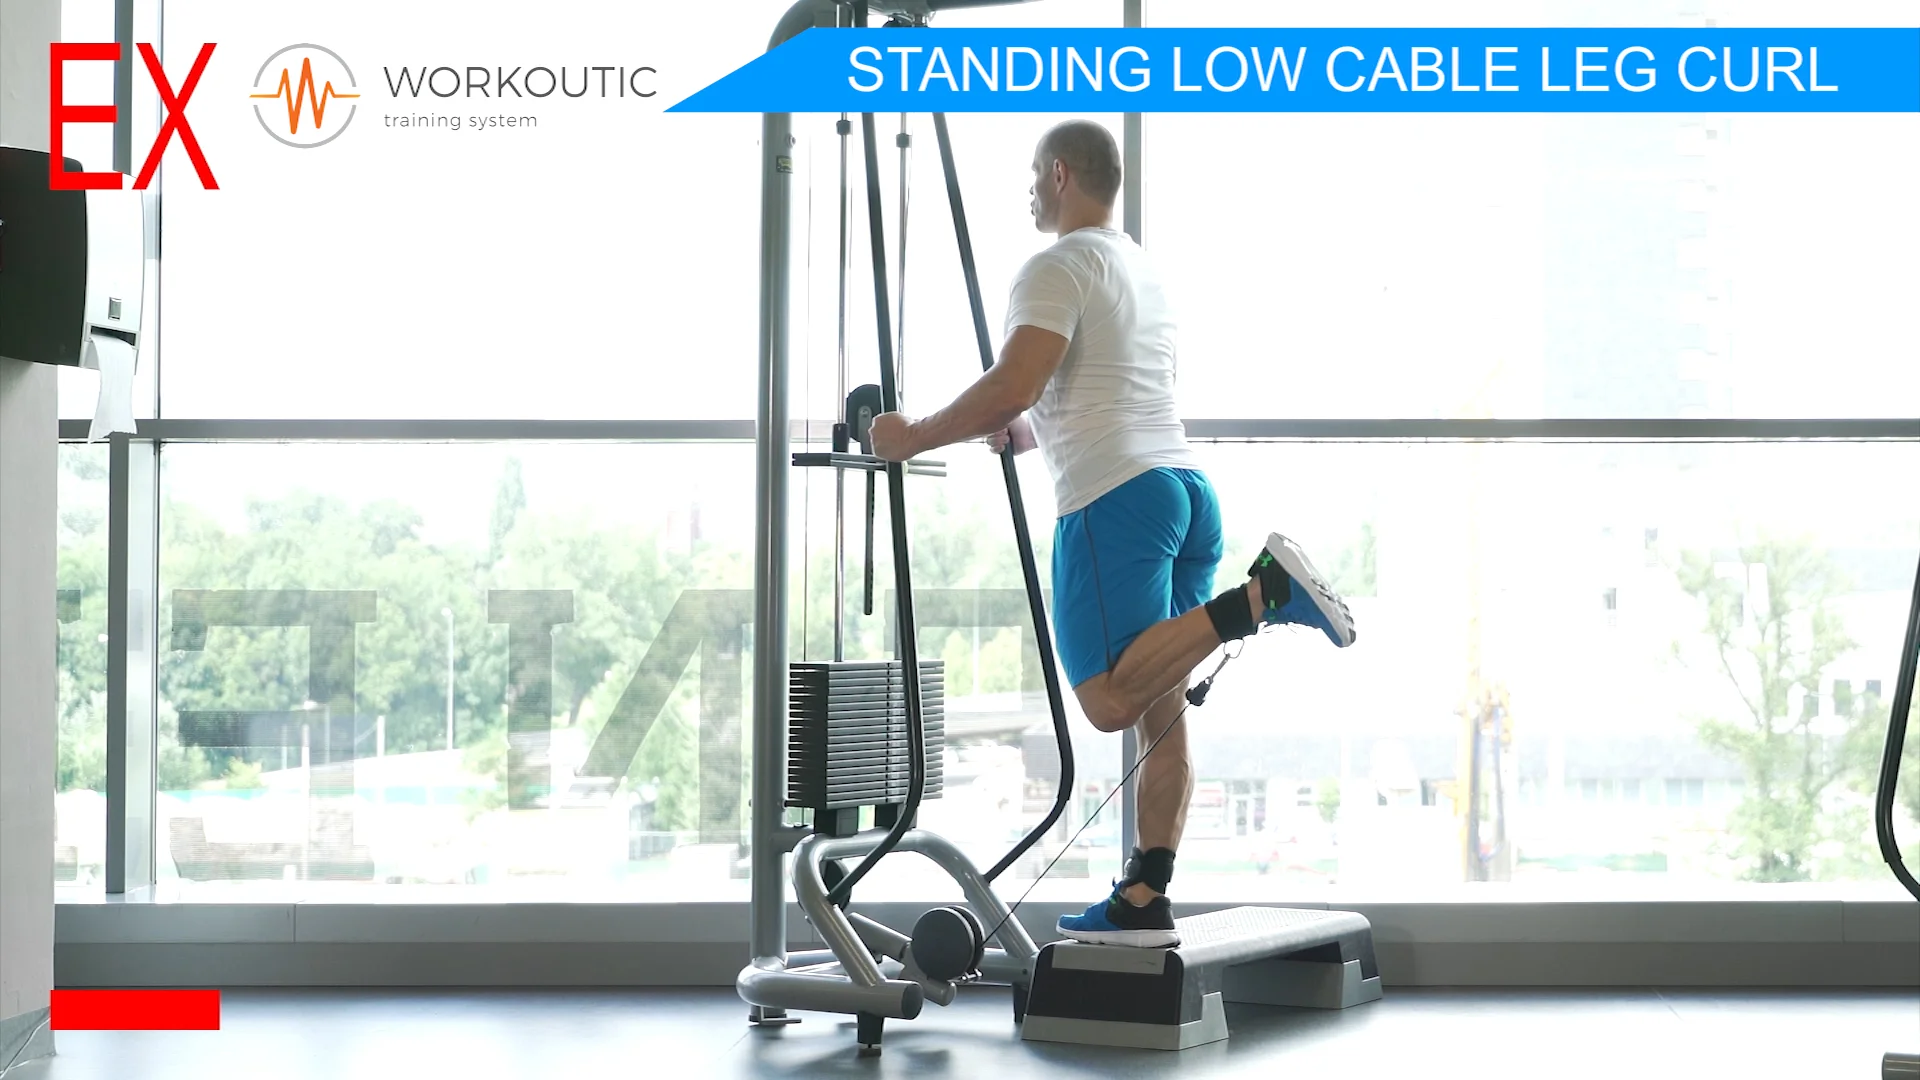 Hamstring Exercises - Standing Low Cable Leg Curl on Vimeo